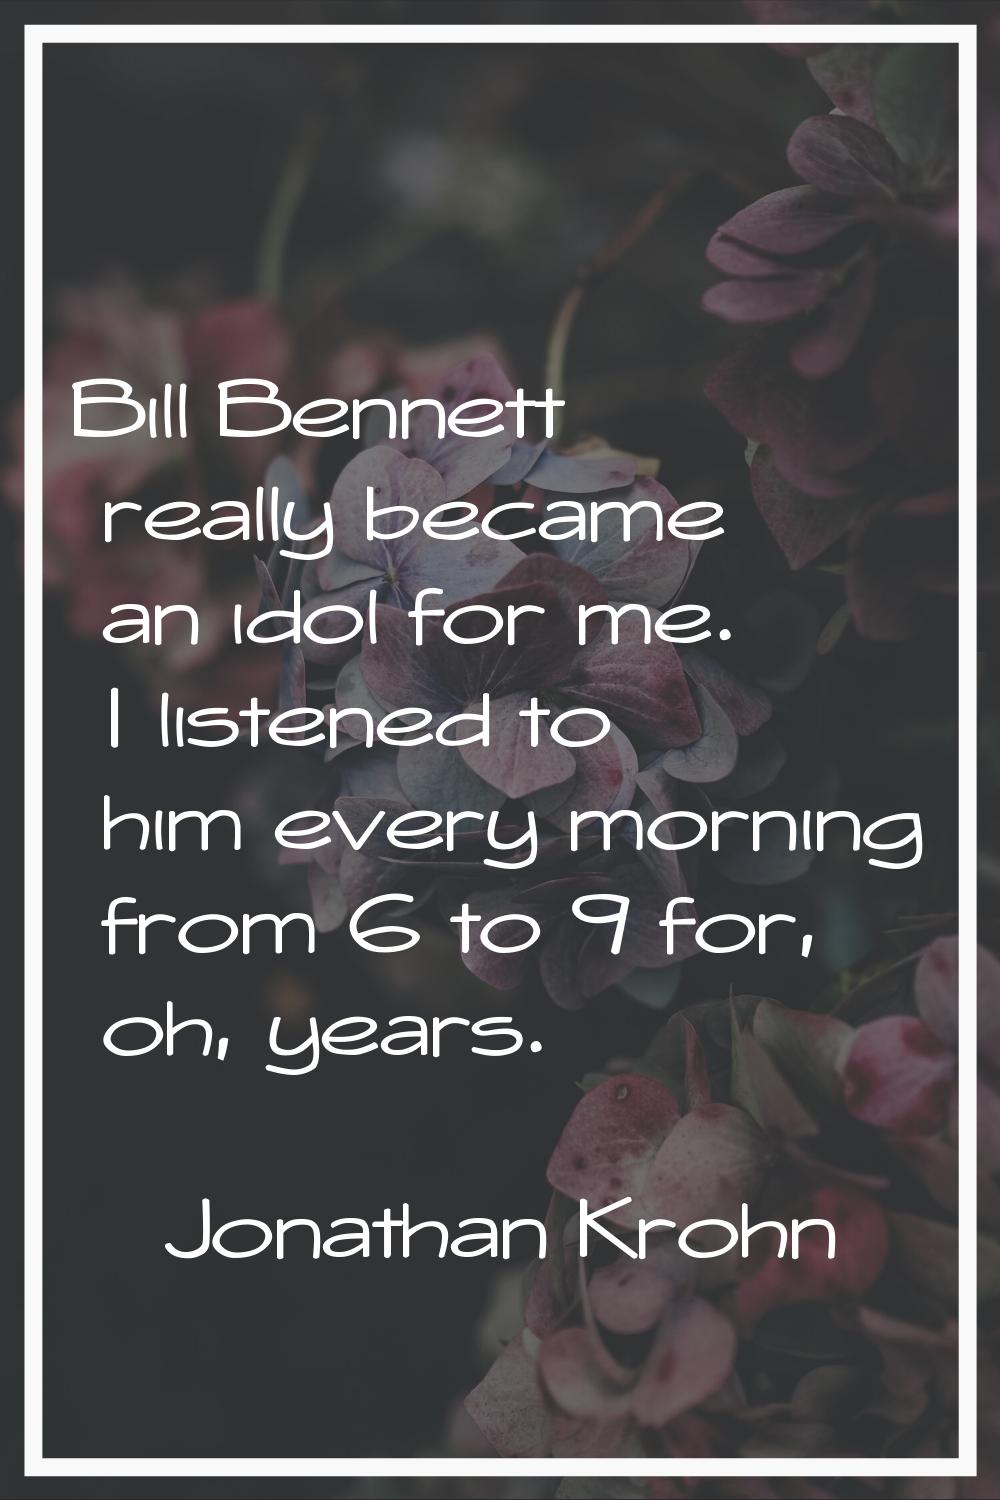 Bill Bennett really became an idol for me. I listened to him every morning from 6 to 9 for, oh, yea